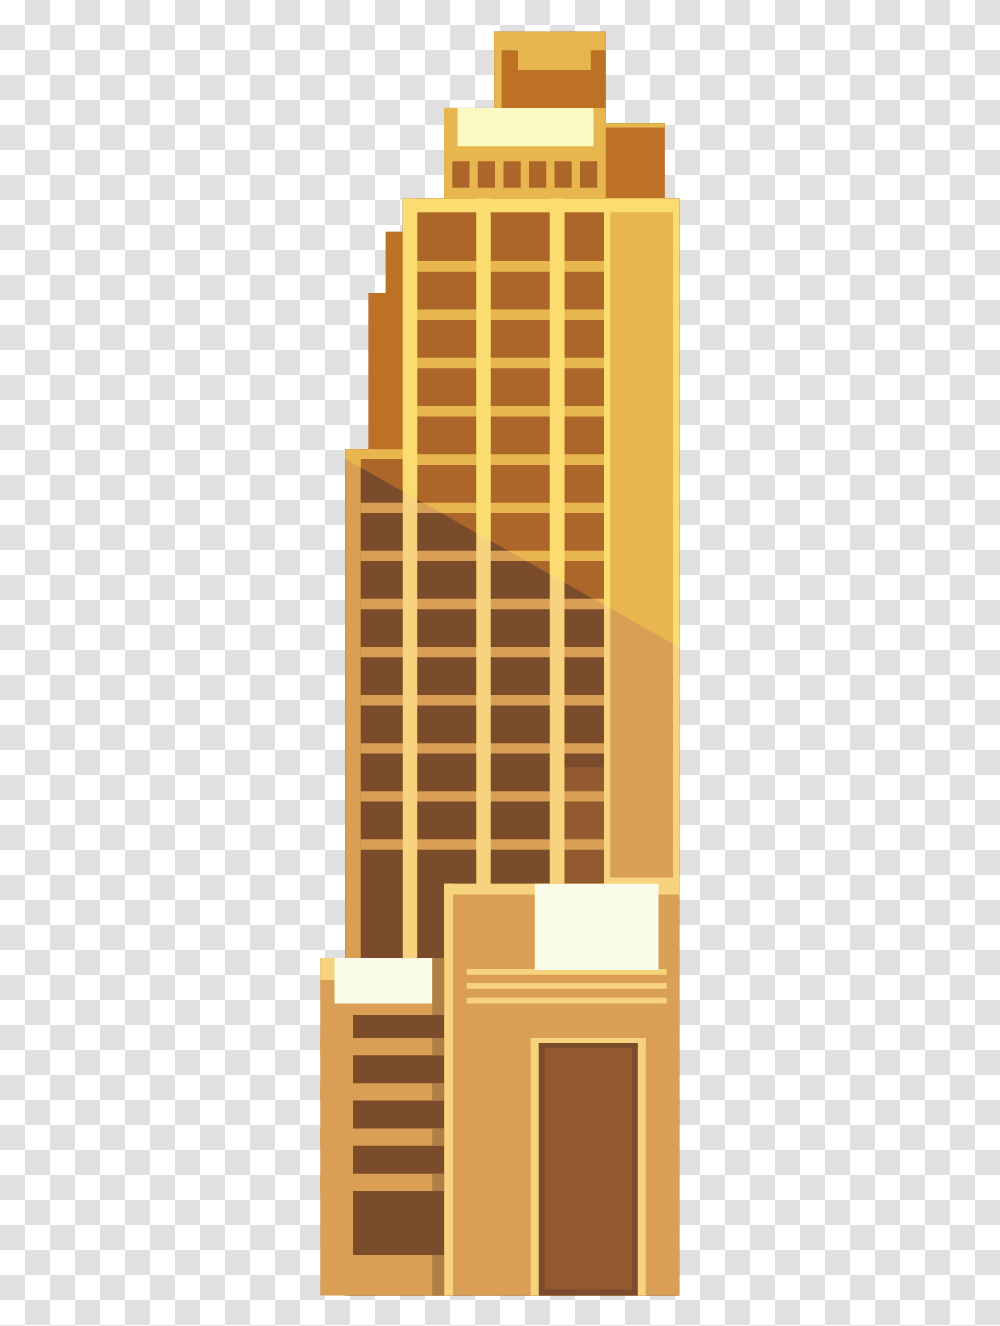 Graphic Royalty Free Download Building Skyscraper Highrise Hochhaus, Furniture, Wood, Door, Tabletop Transparent Png